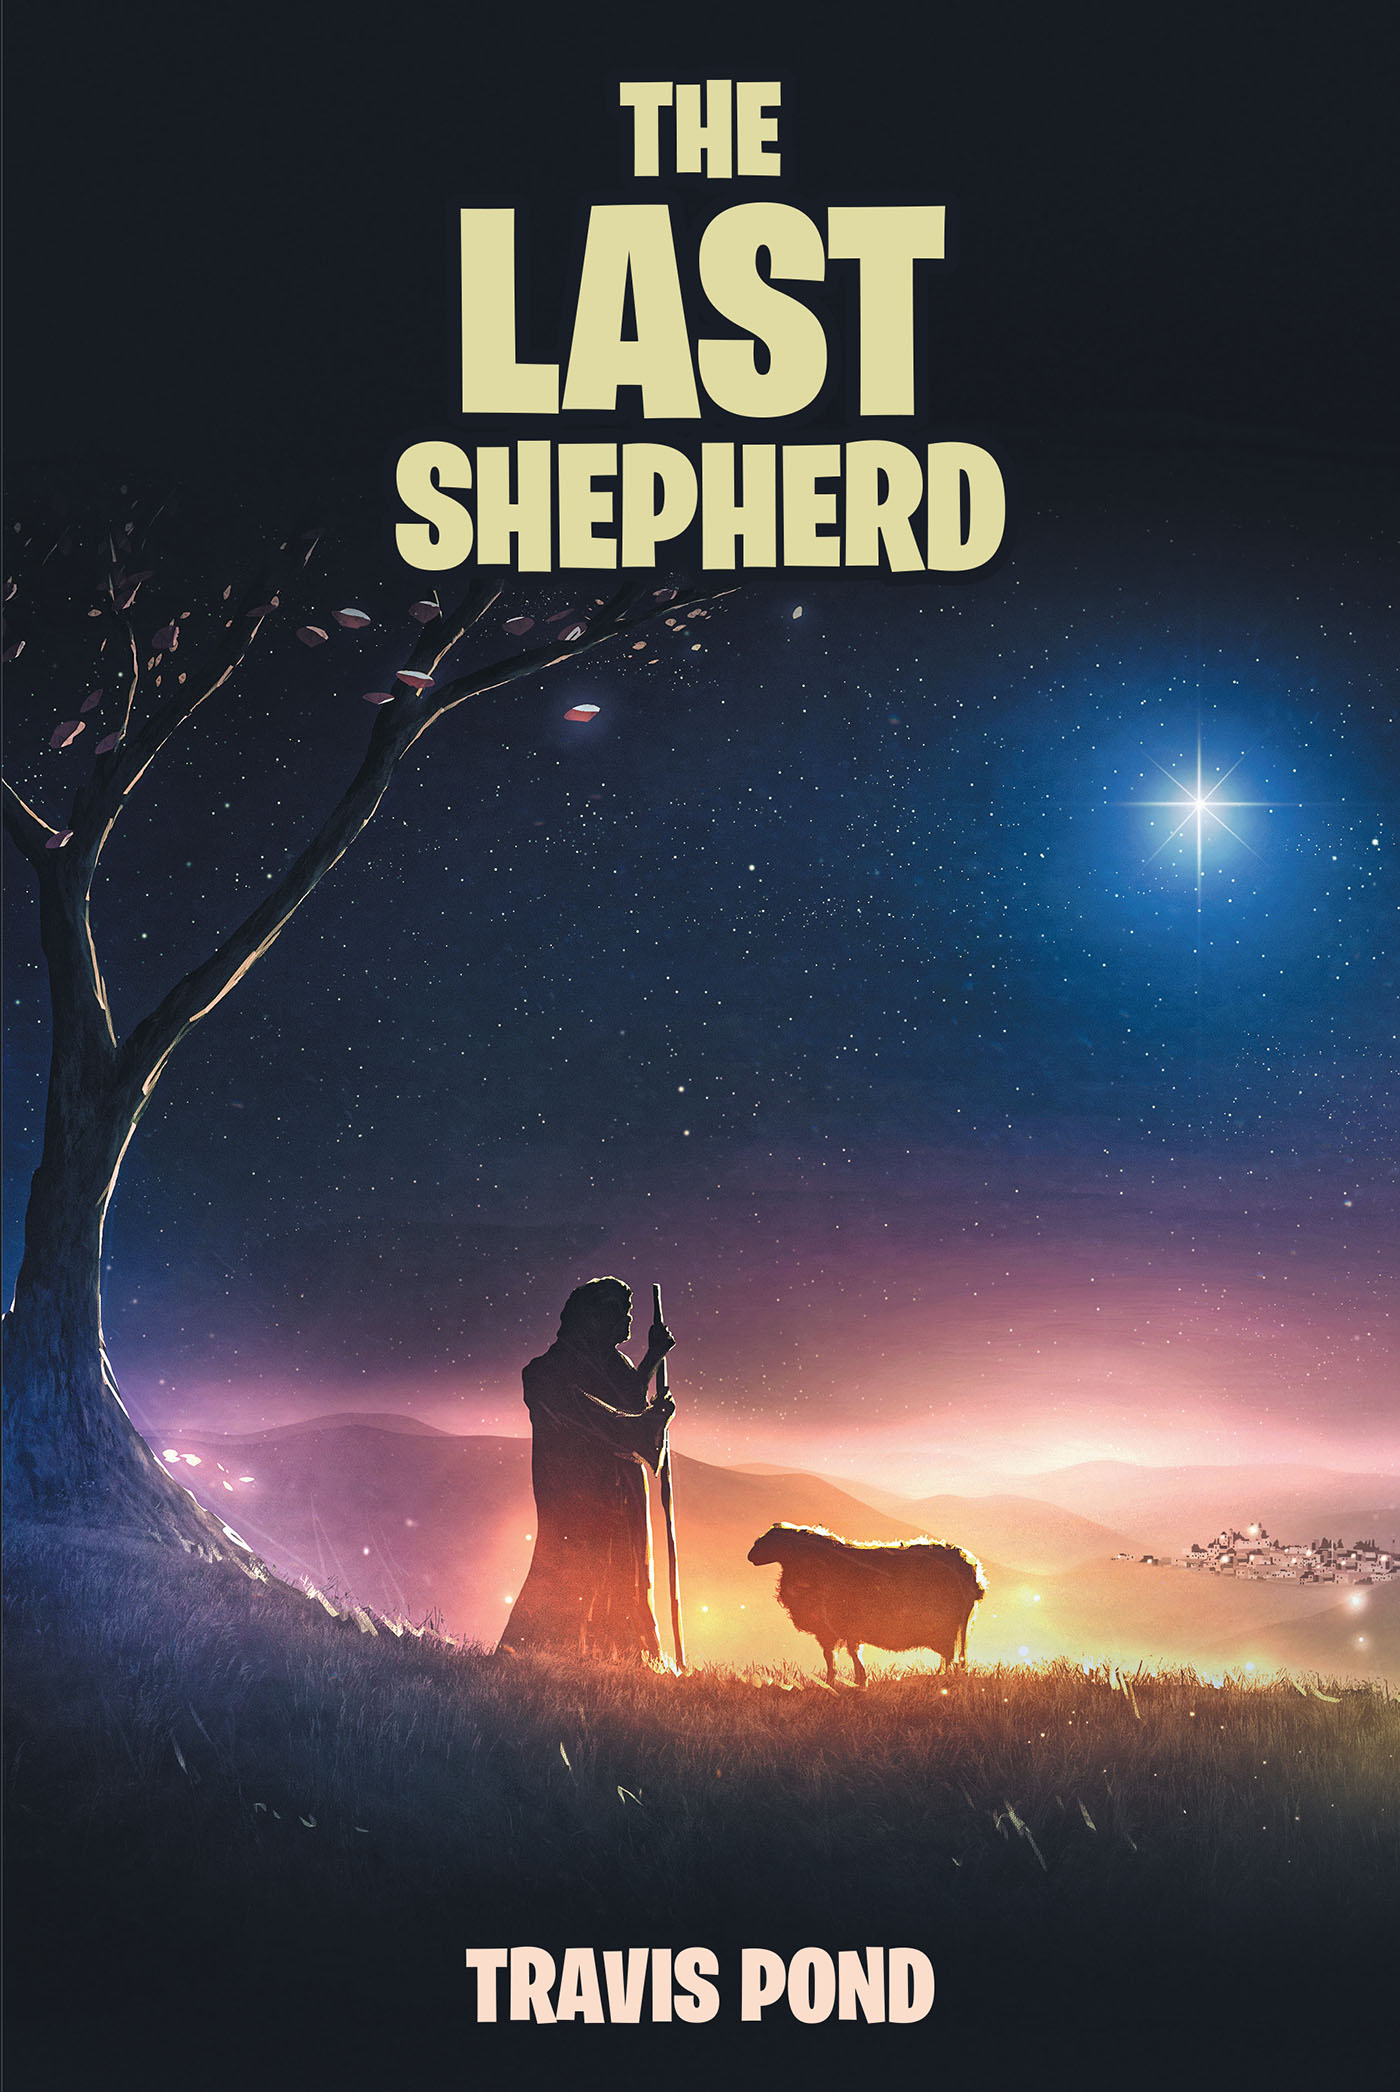 Author Travis Pond’s New Book, "The Last Shepherd," is a Heartfelt Story of Two Siblings Willing to Overcome Their Struggles in Pursuit of Their Faith and to Know Christ